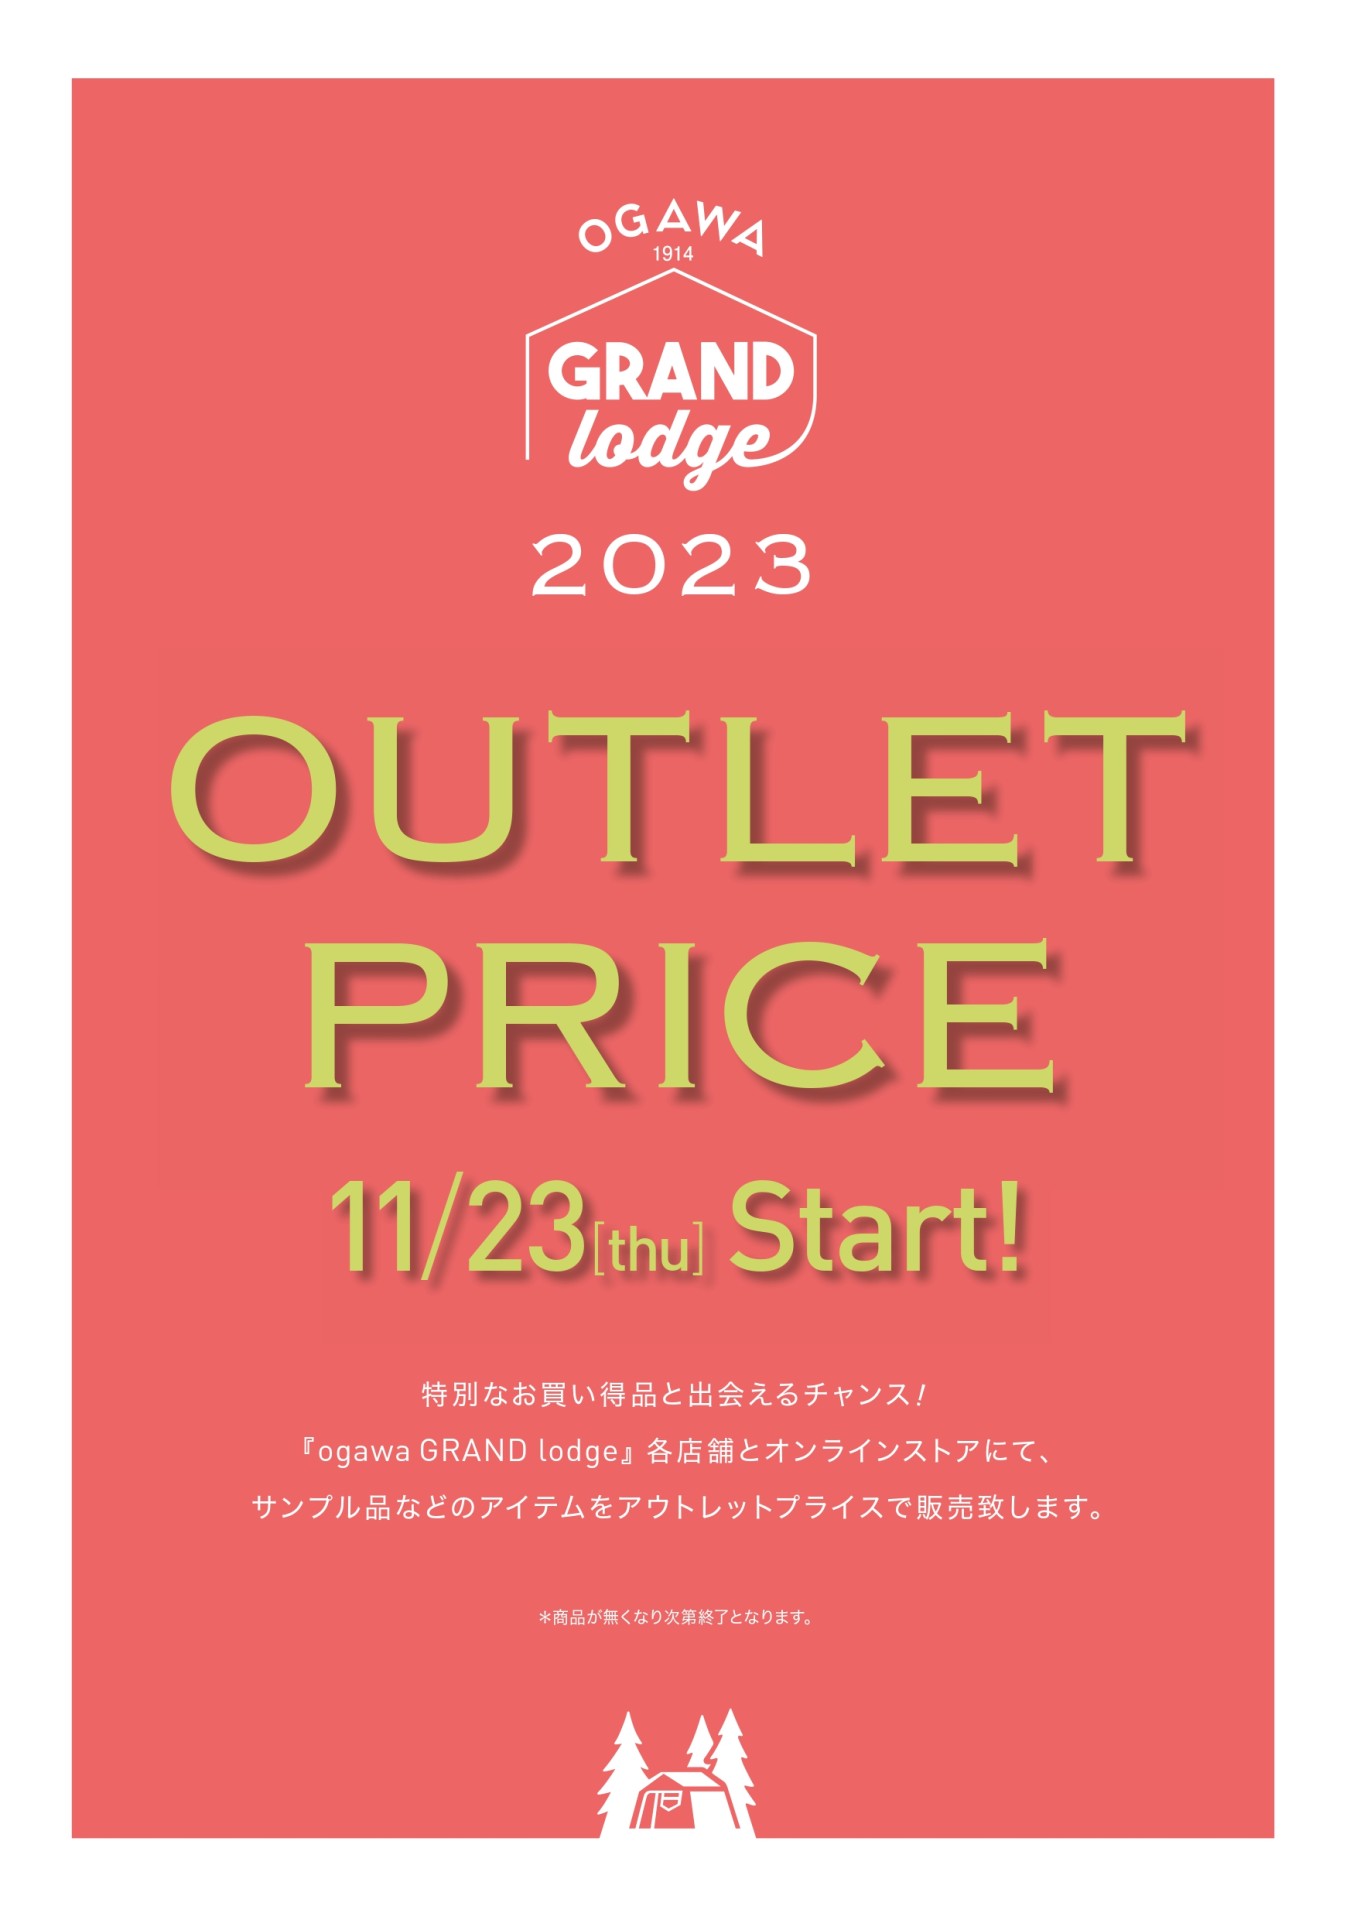 Outlet price